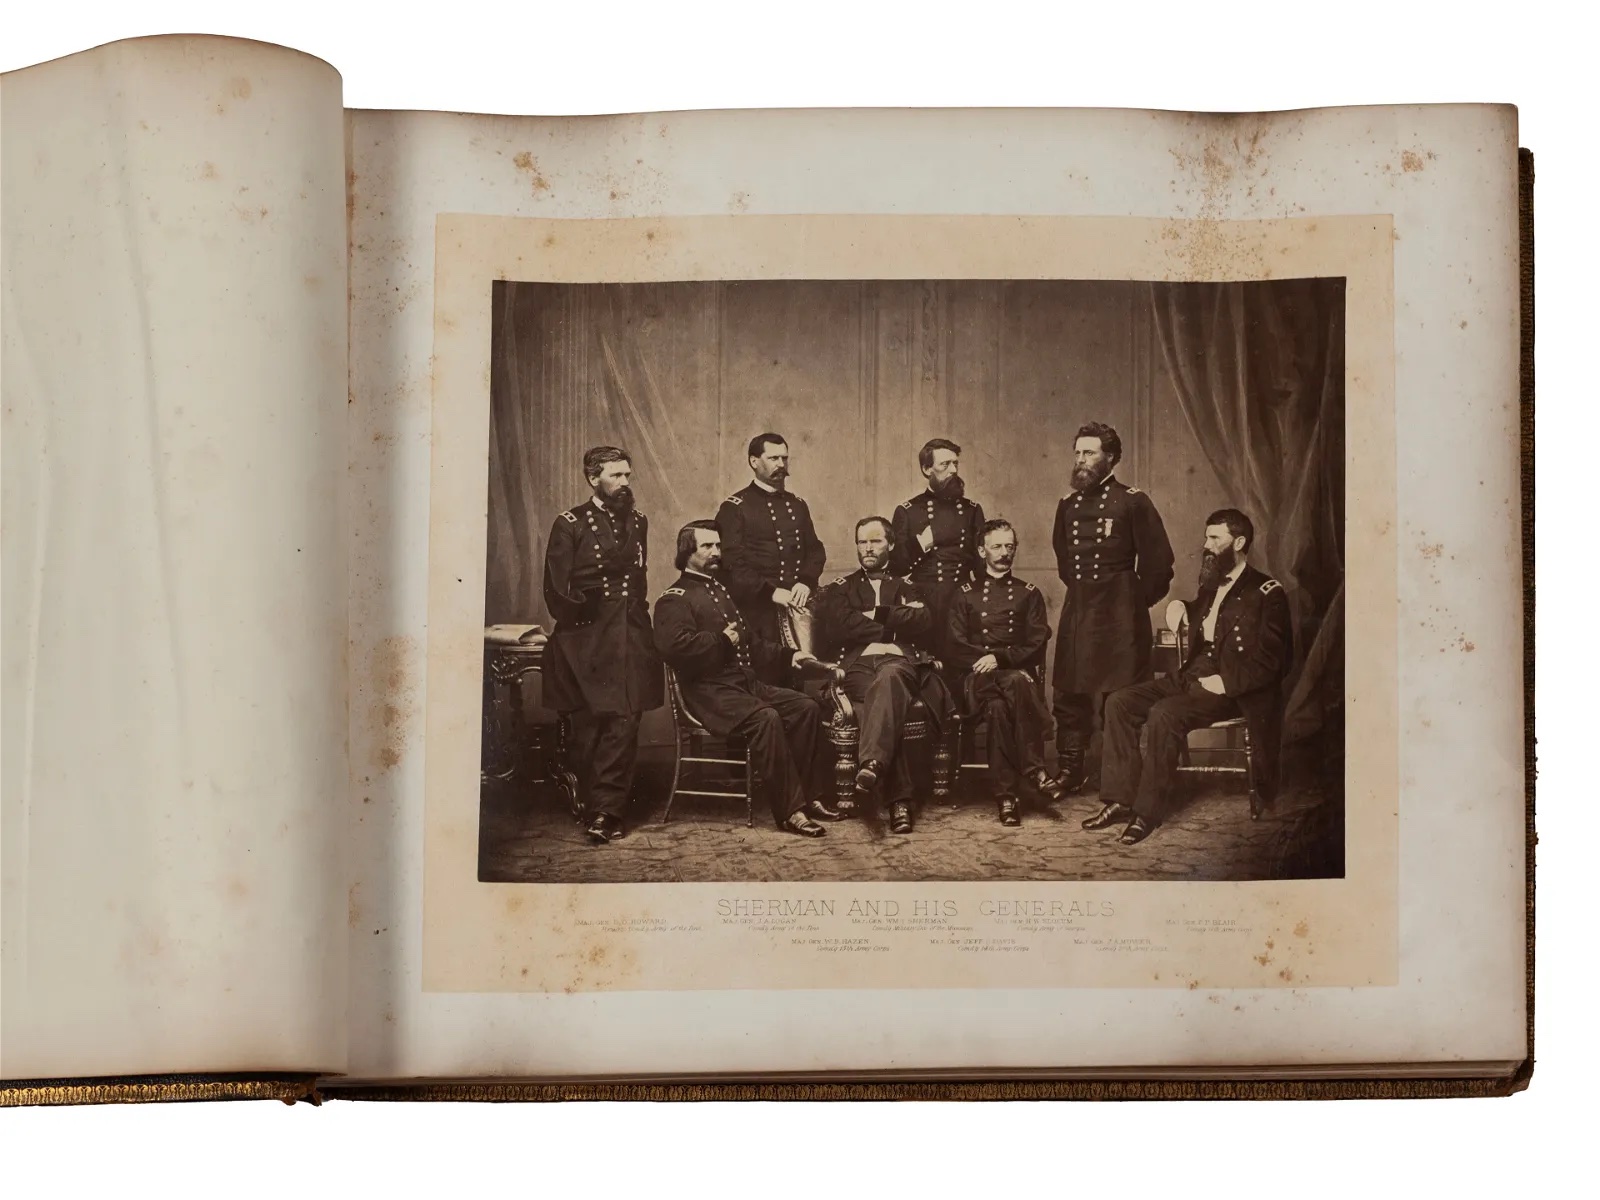 General W. T. Sherman's copy of Barnard's 'Photographic Views of Sherman's Campaign,' estimated at $60,000-$80,000 at Fleischer's.